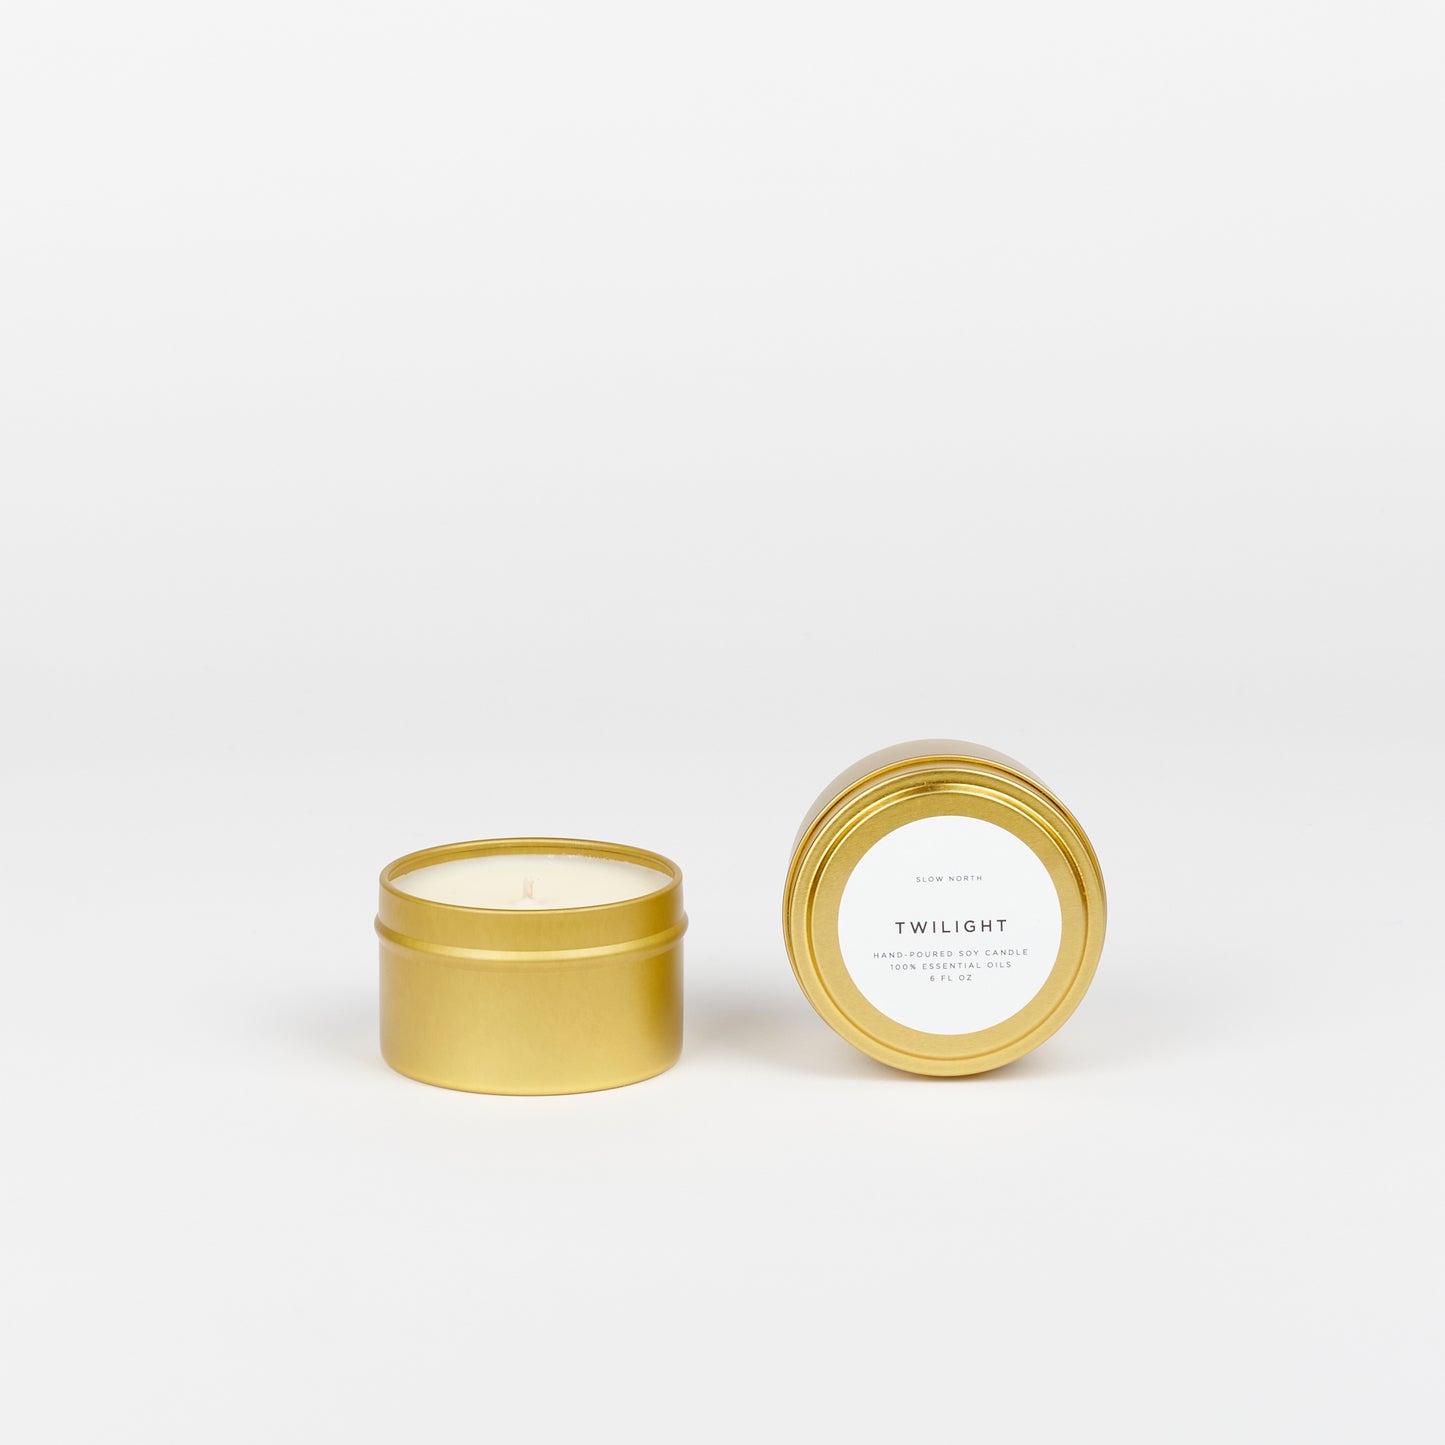 Slow North Travel Tin Candle